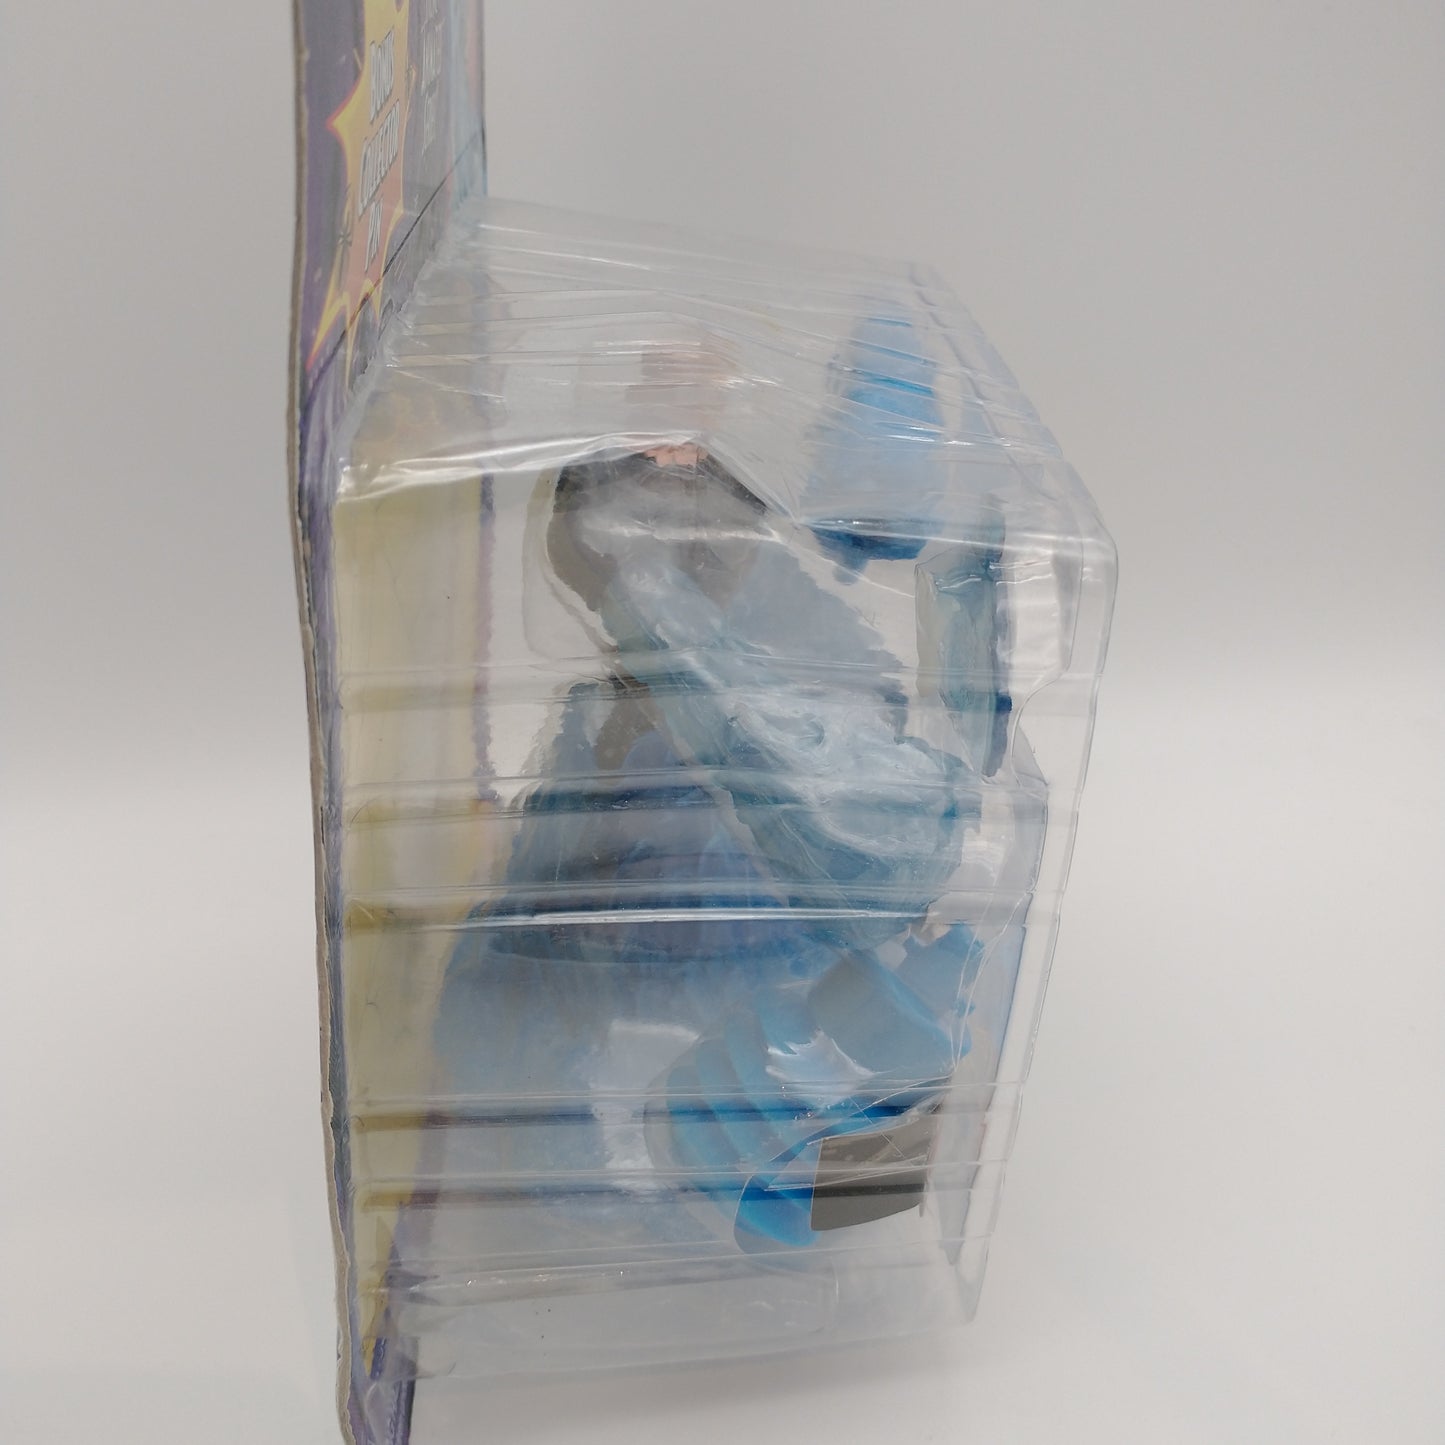 A picture of the right side of the card and bubble. The figure is inside.